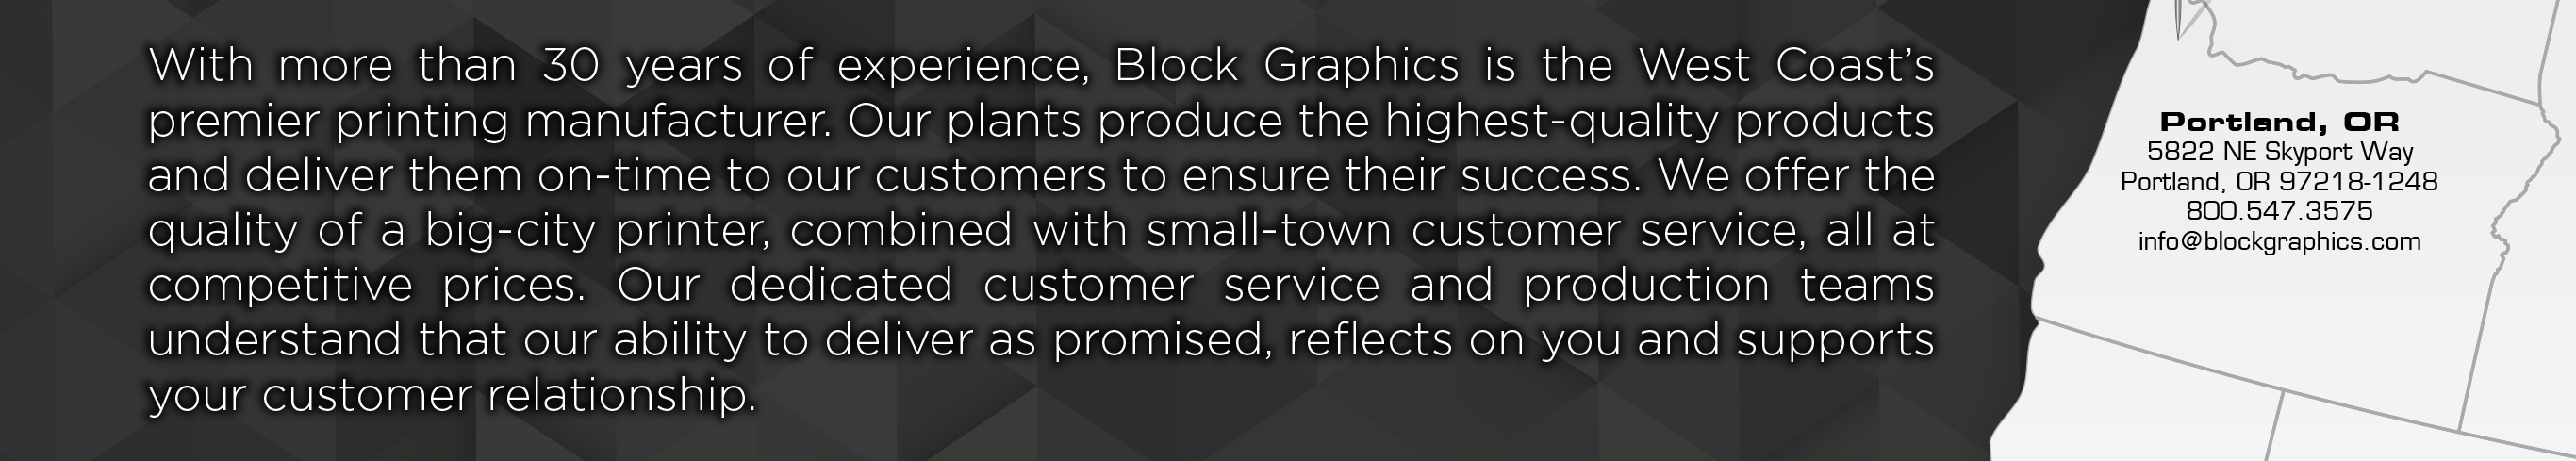 With over 30 years of experience, Block Graphics is the West Coast’s premier printing manufacturer. Our plants produce the highest quality products and deliver them on-time to our customers to ensure their success. We offer the quality of a big-city printer, combined with small-town customer service, all at competitive prices. Our dedicated customer service and production teams understand that our ability to deliver as promised, reflects on you and supports your customer relationship.